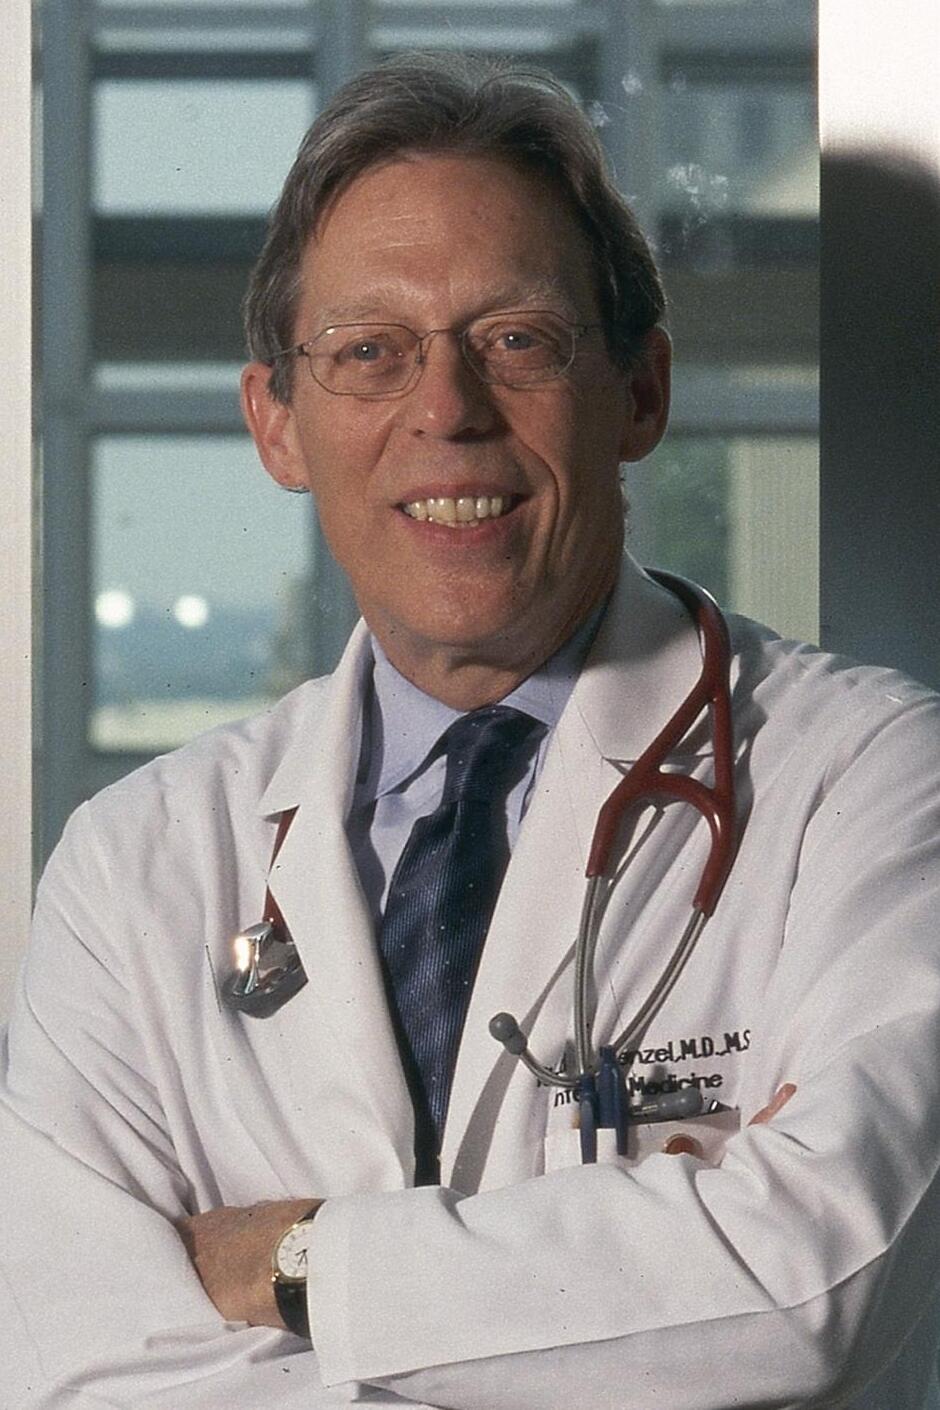 Dr. Richard Wenzel has been awarded the Laureate Award by the Virginia chapter of the American College of Physicians.